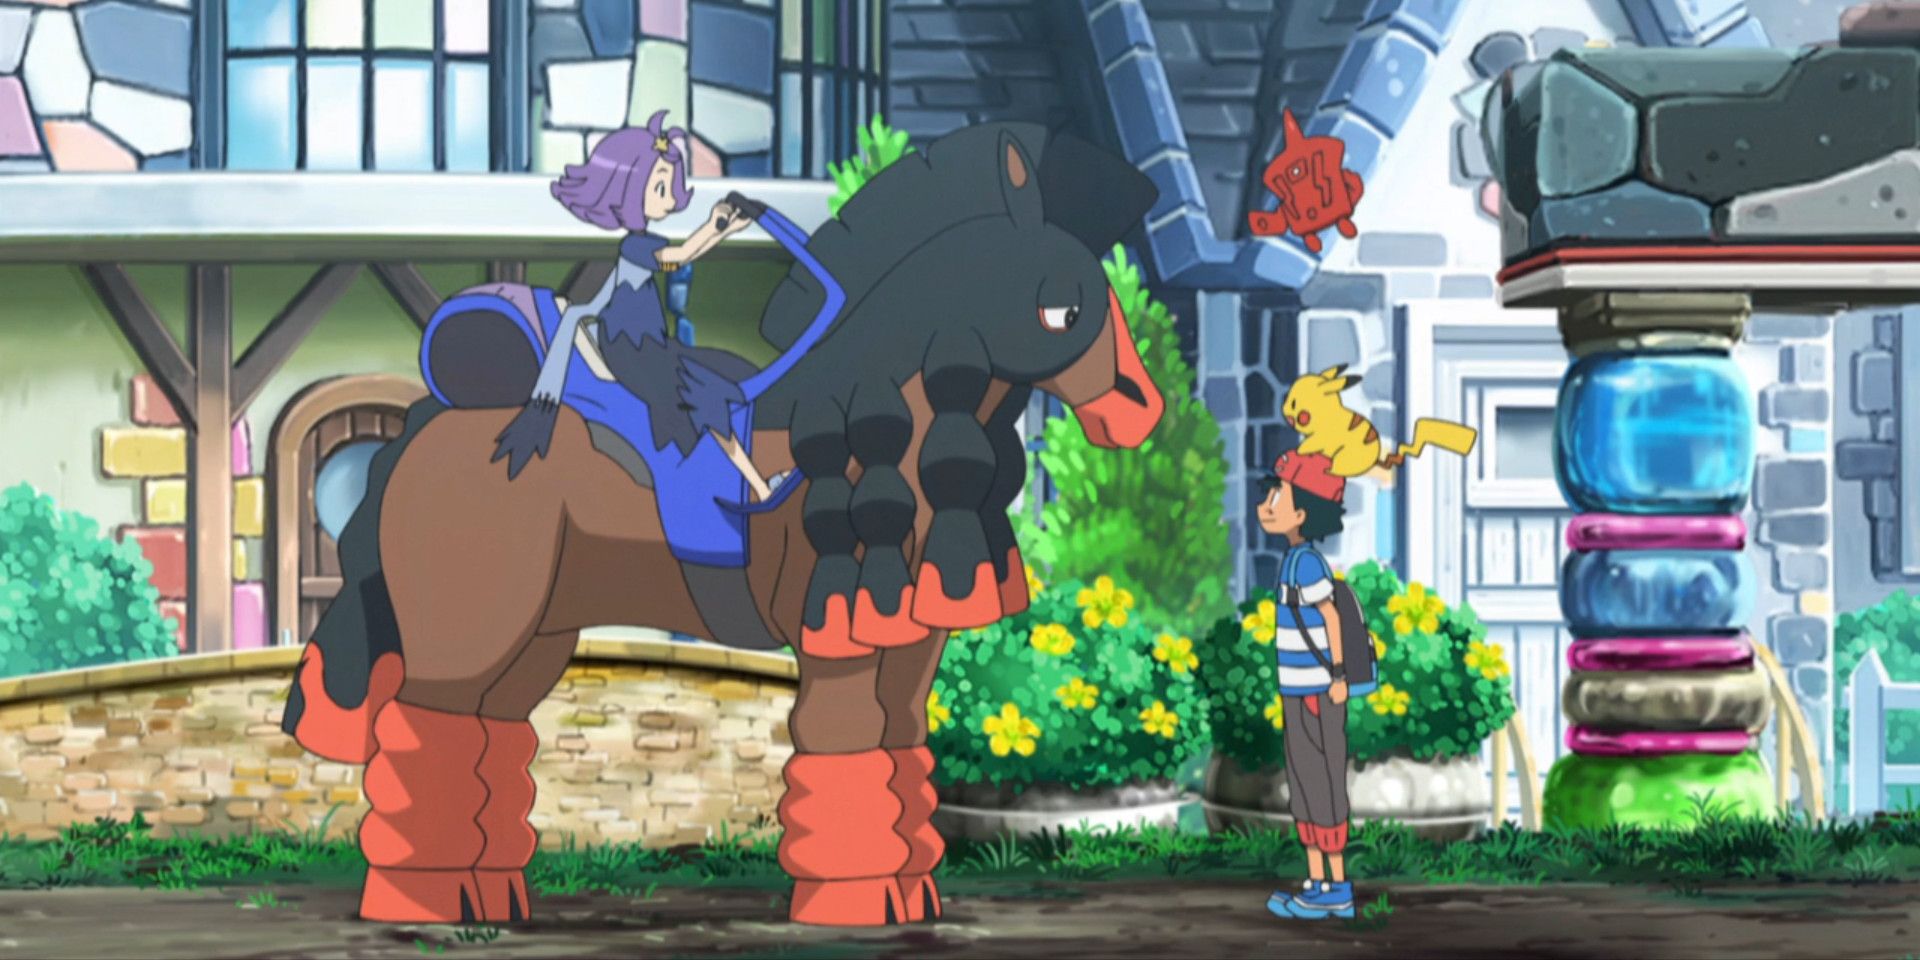 Mudsdale rides with a young girl on its back in the Pokemon anime.